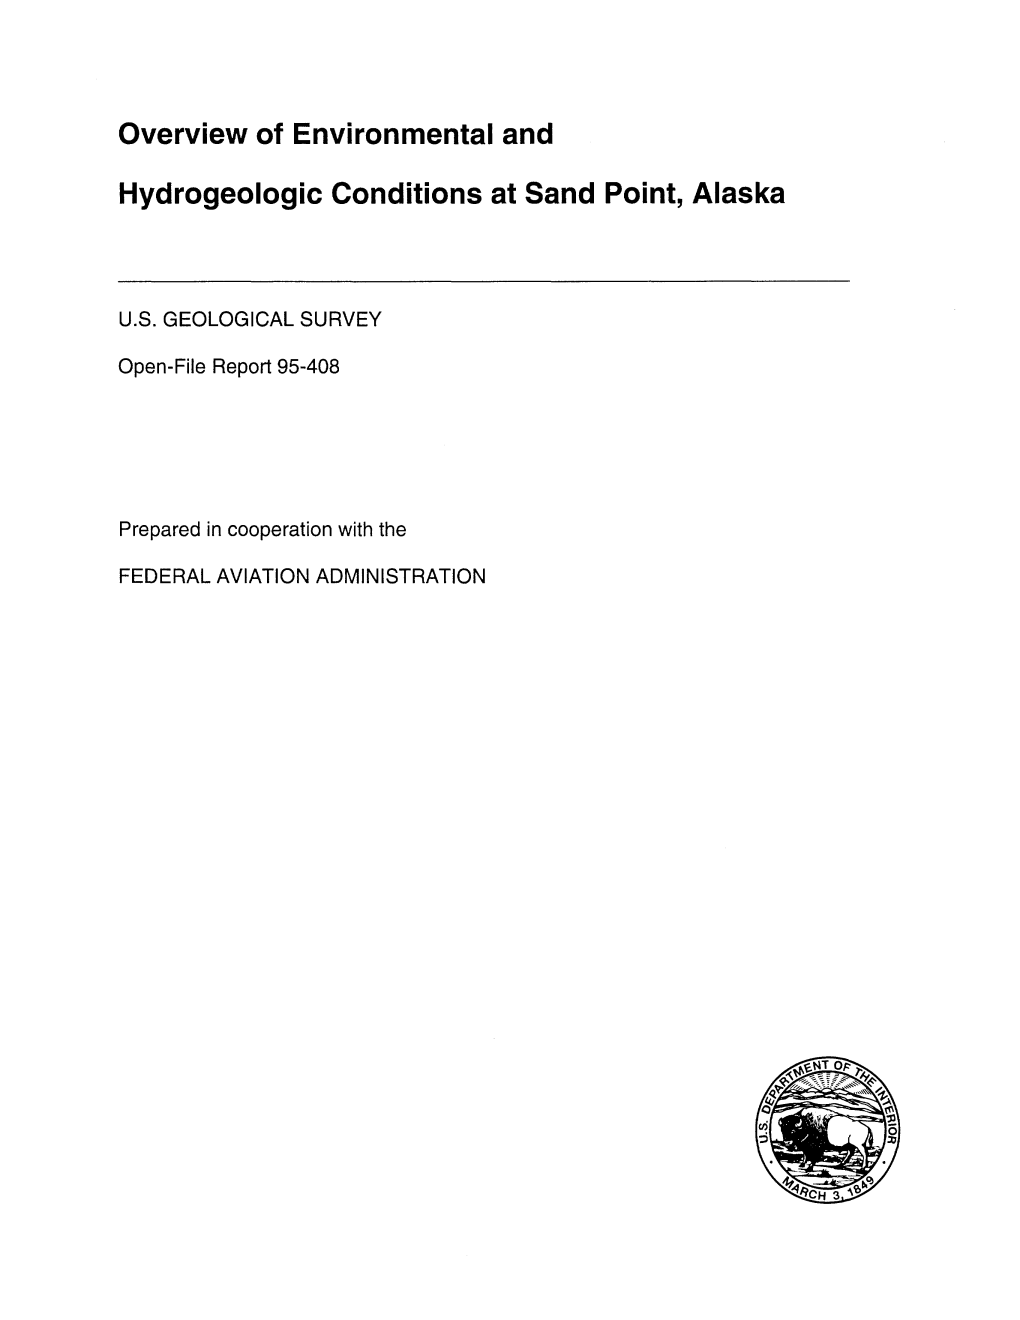 Overview of Environmental and Hydrogeologic Conditions at Sand Point, Alaska